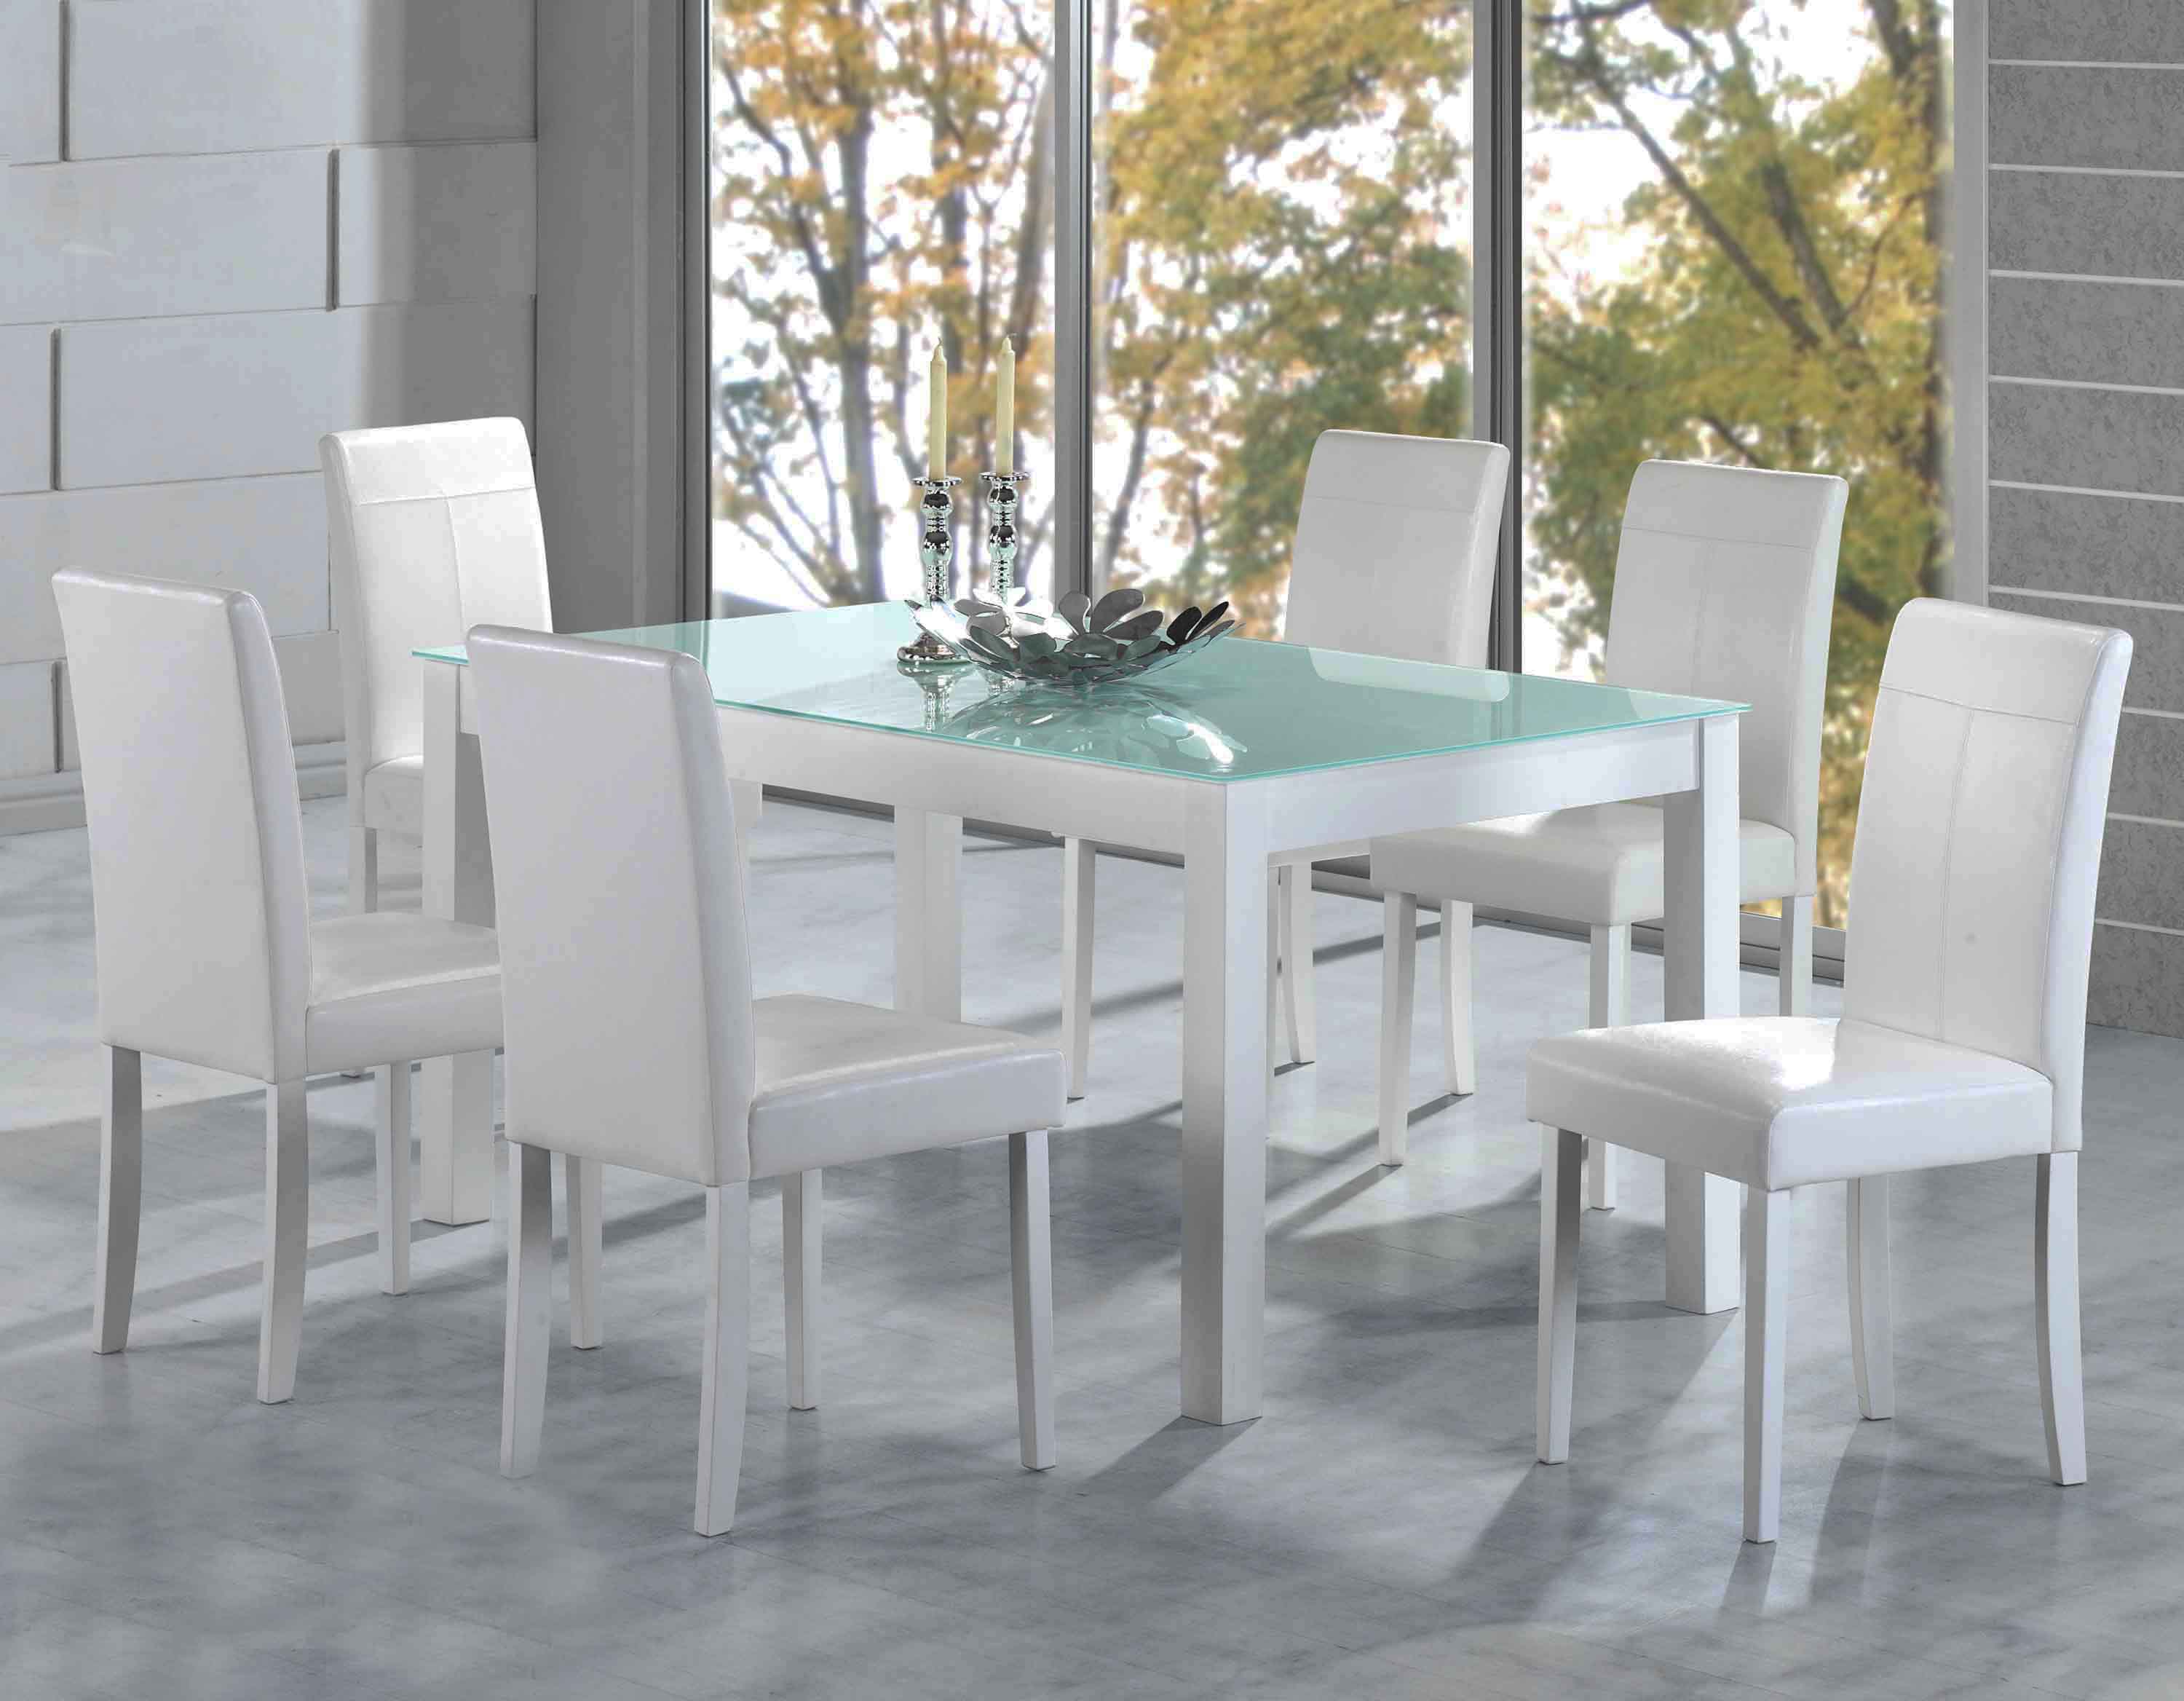 Ivo-107 dining table